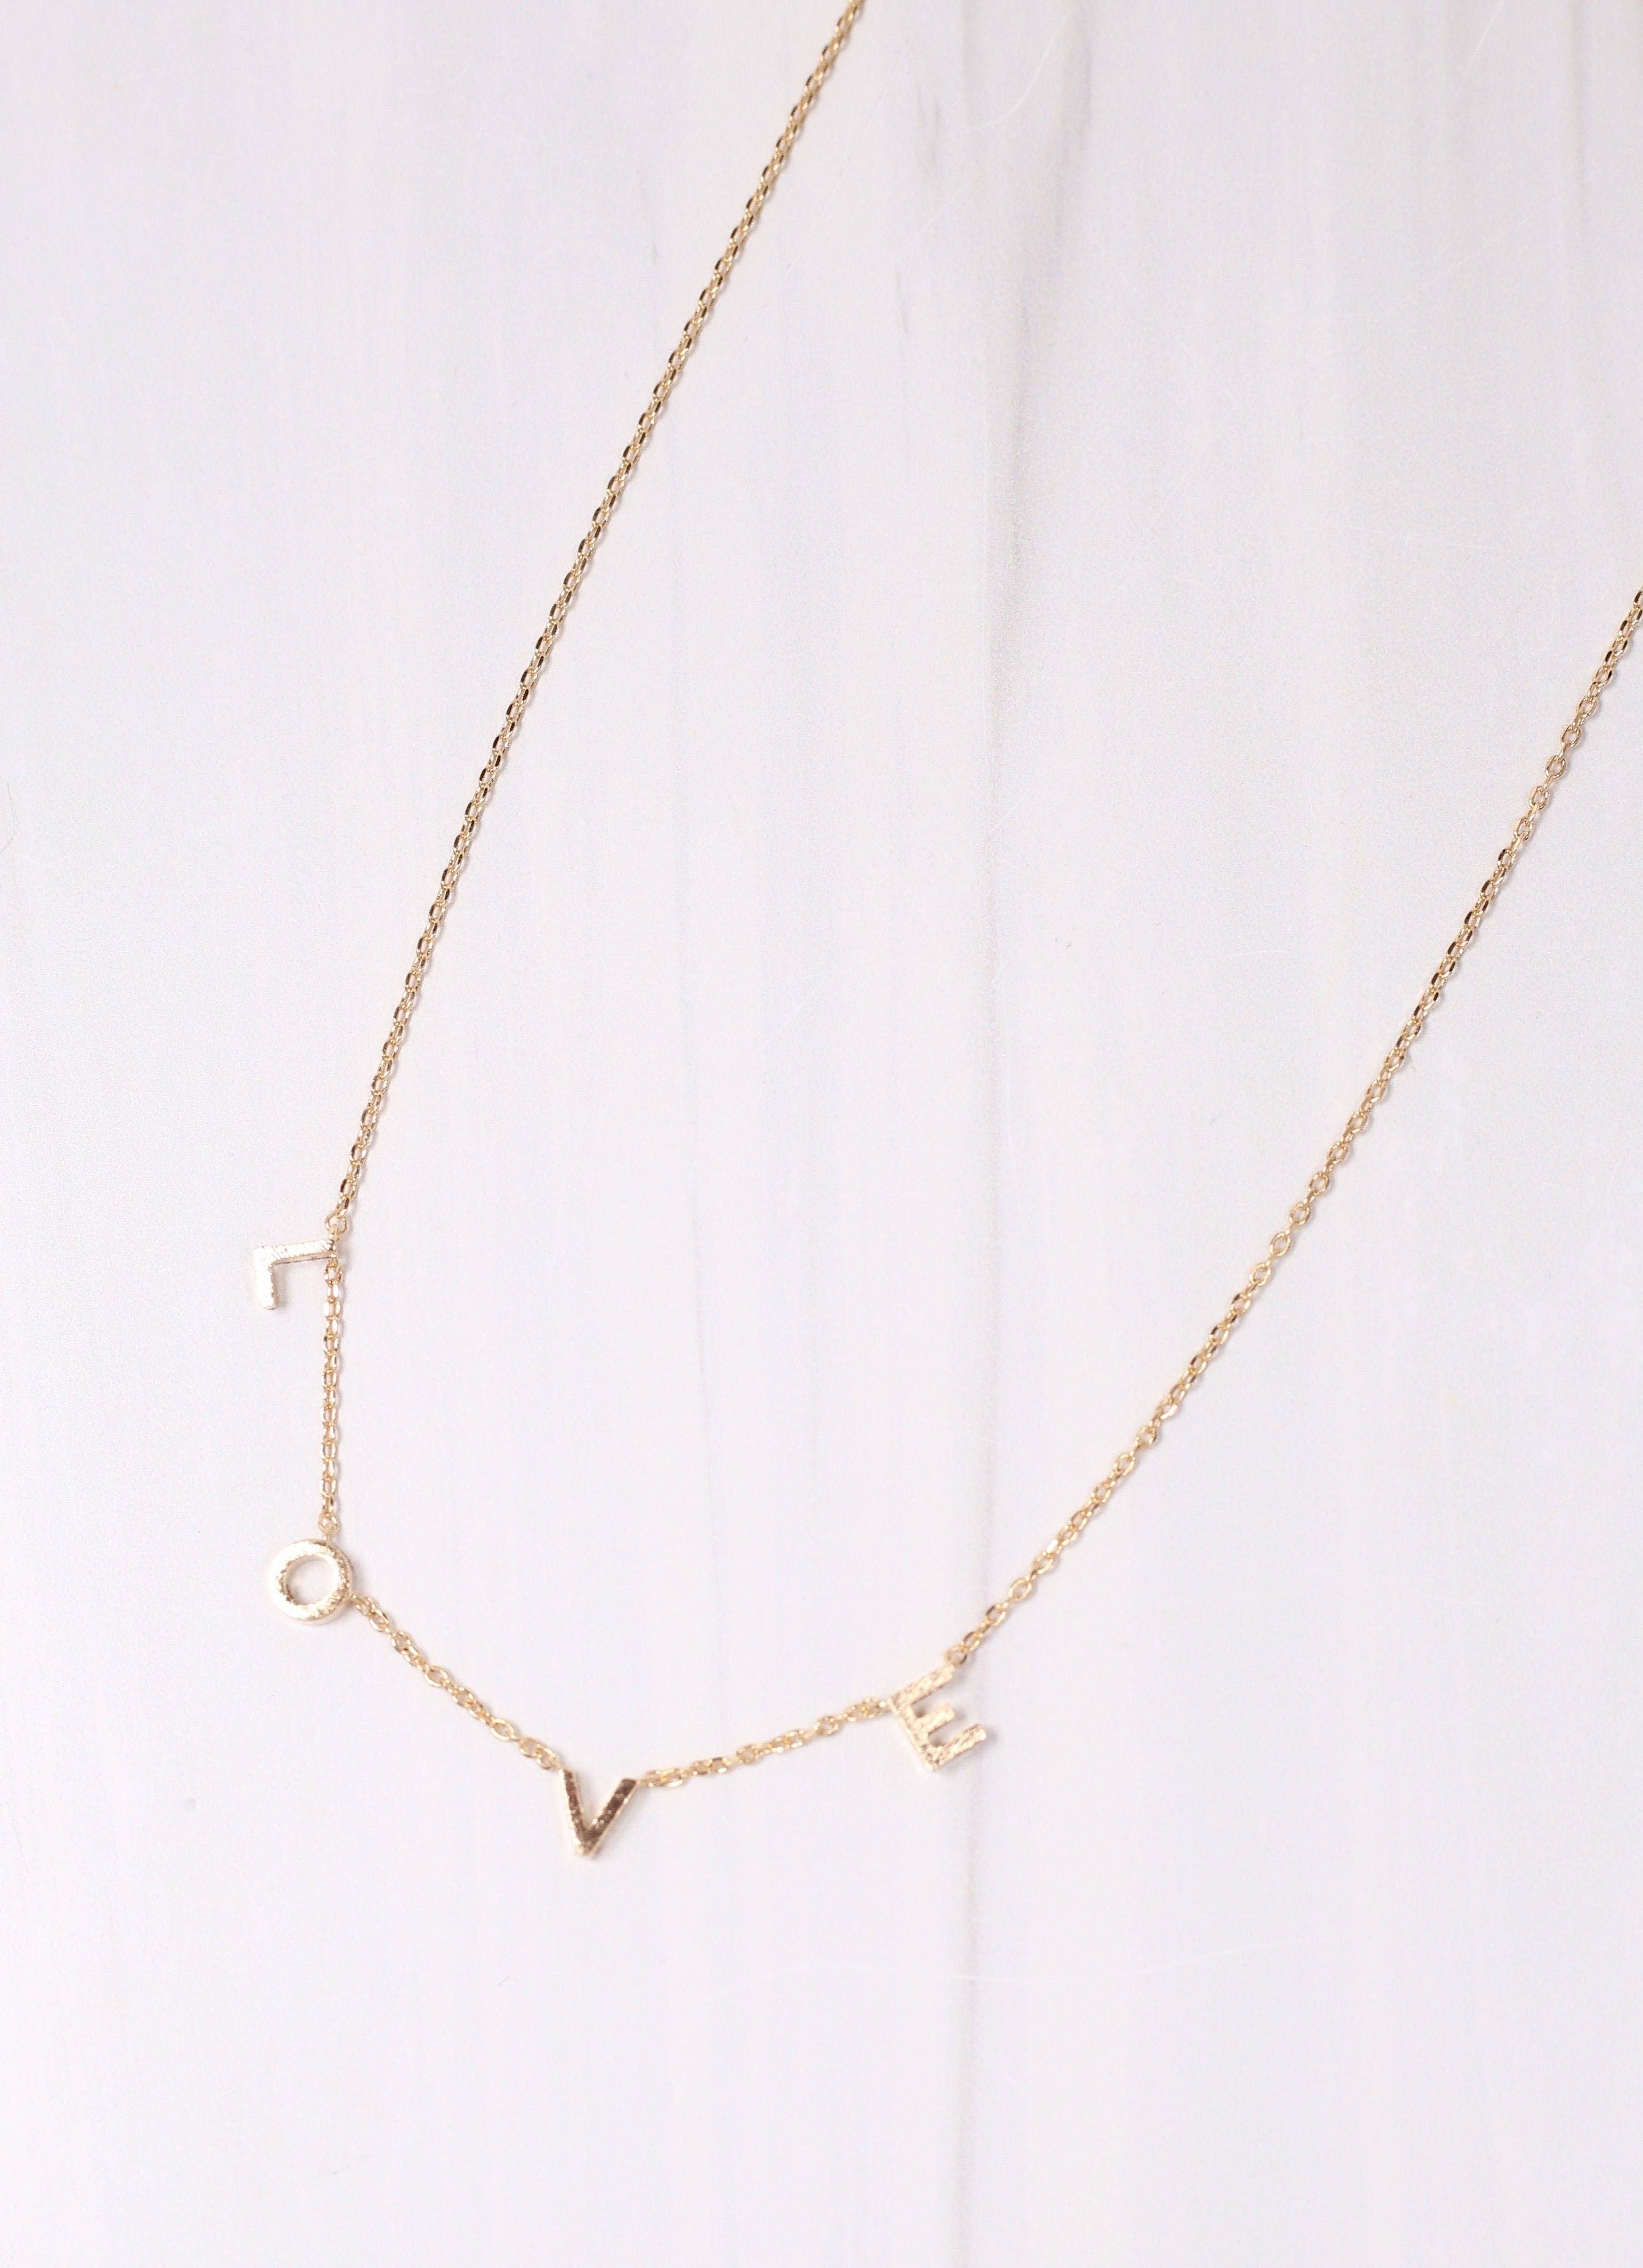 Love Station Necklace in Gold